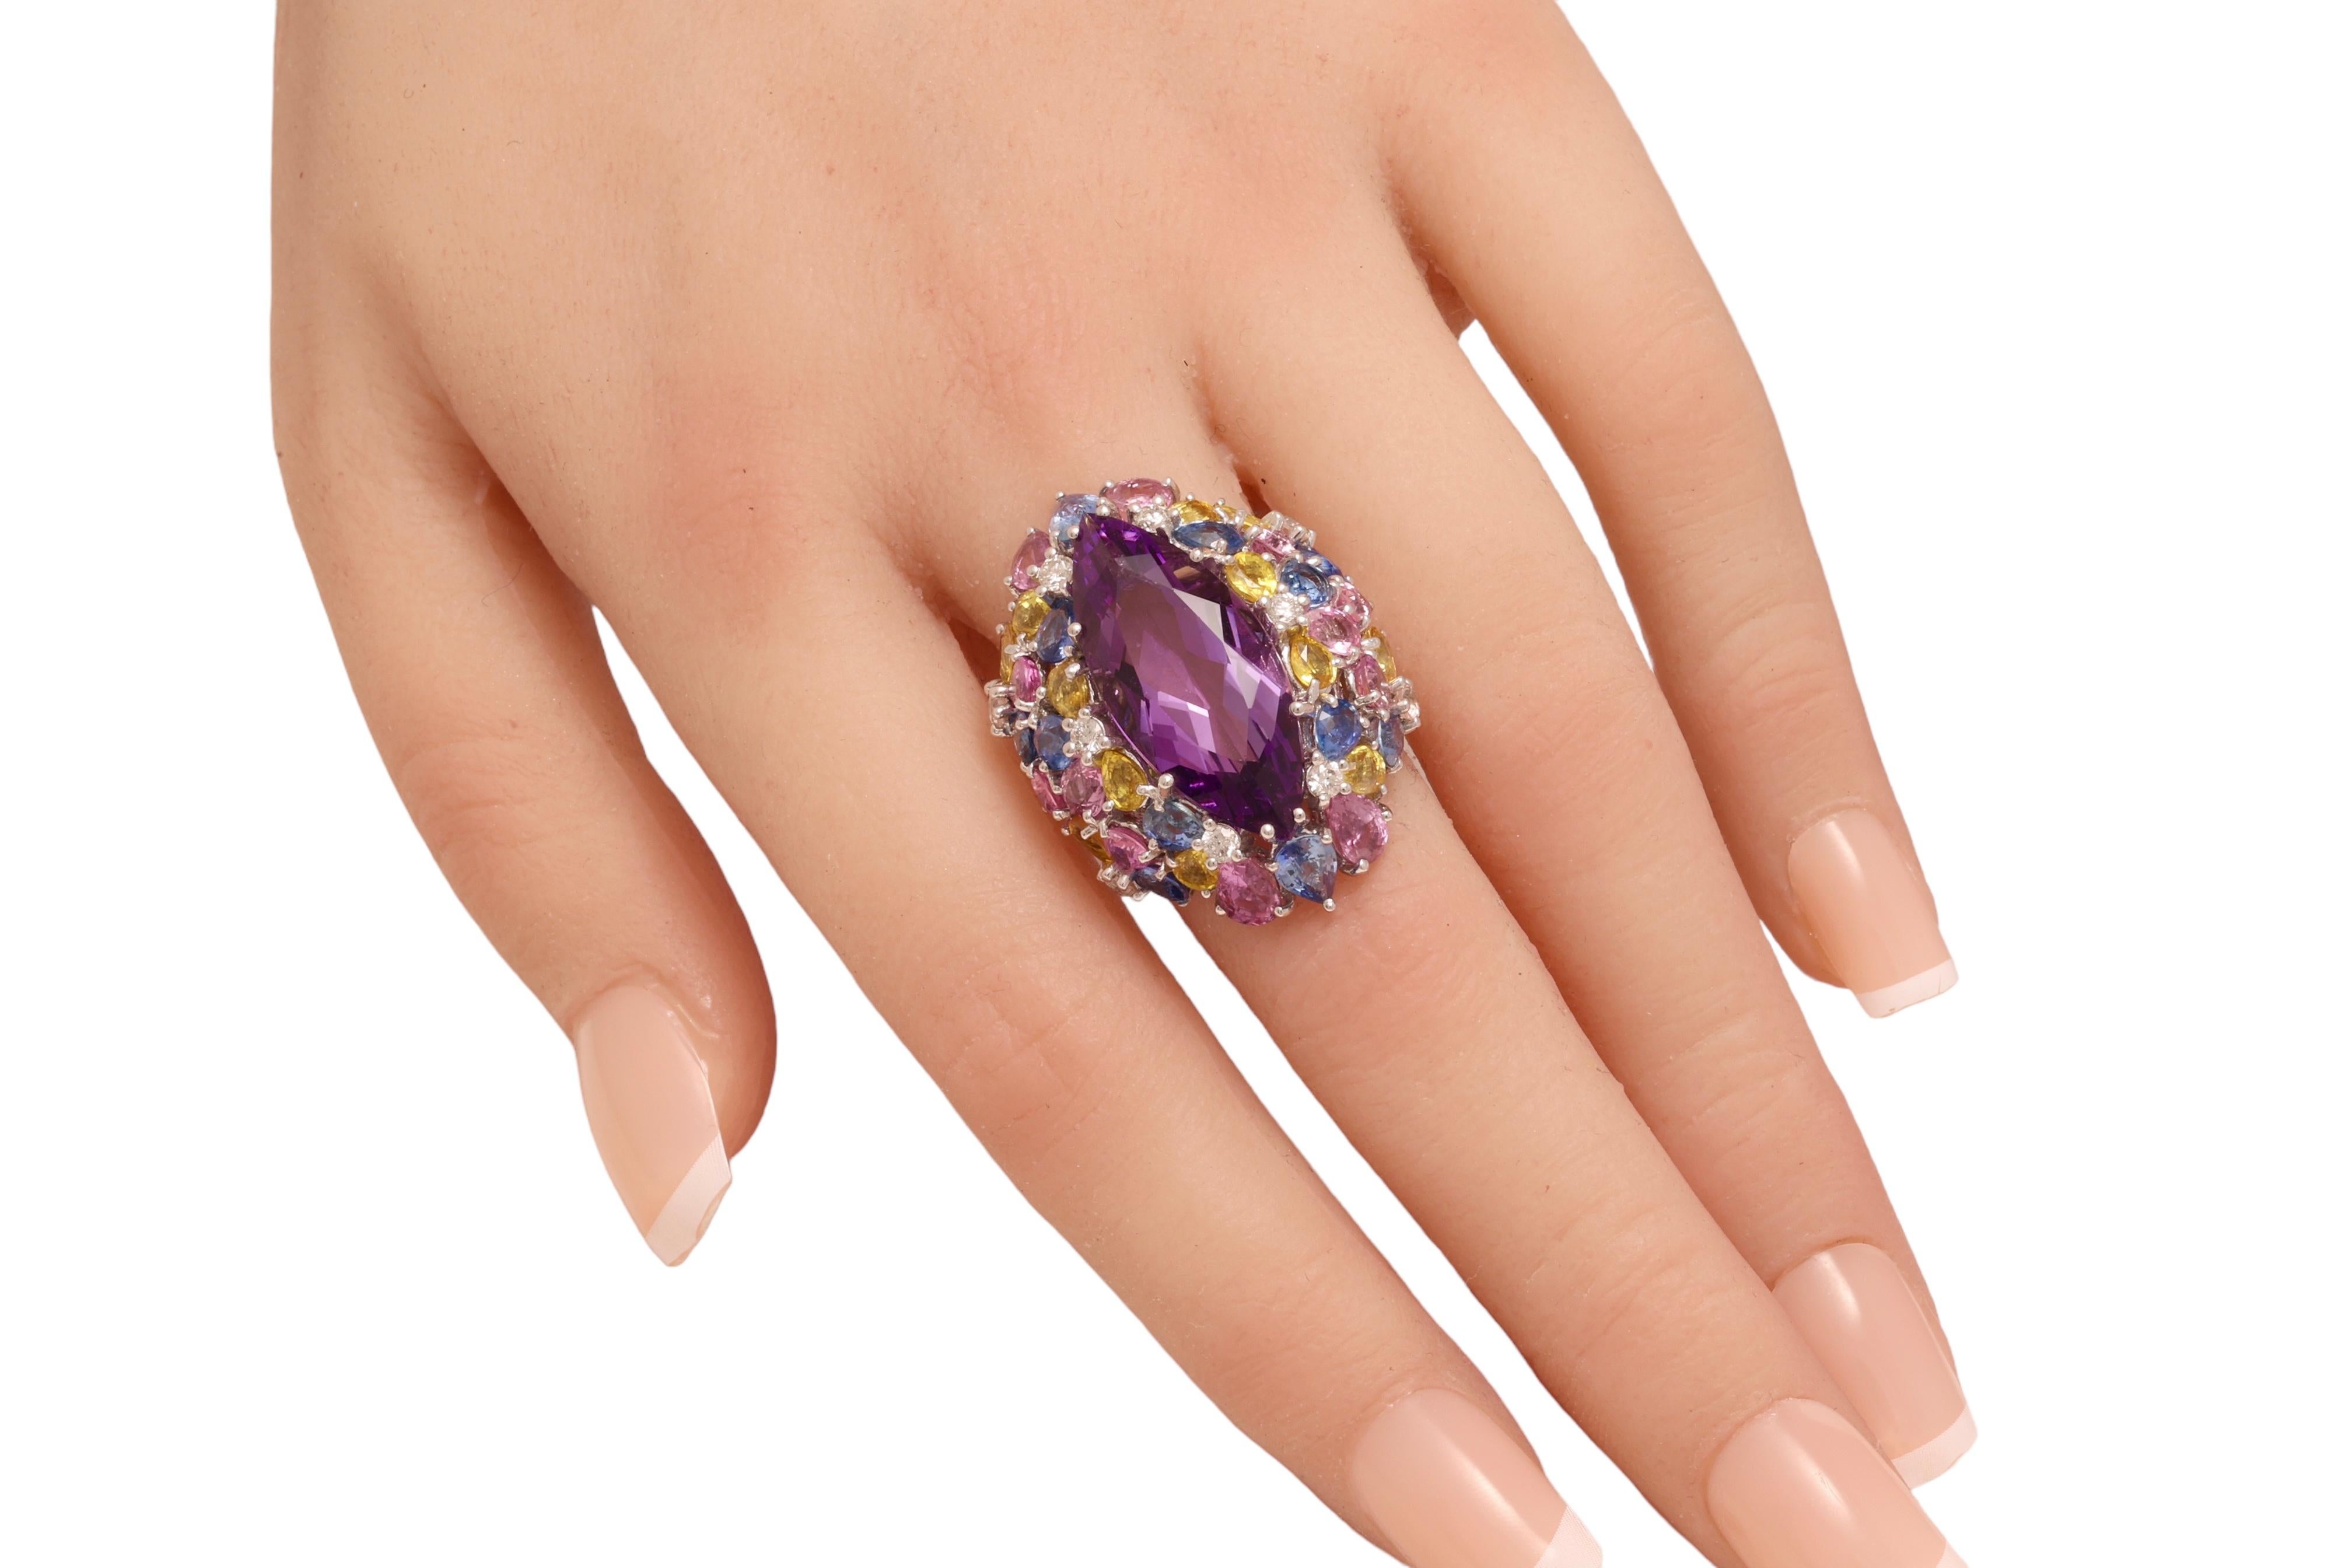 Magnificent 18kt White Gold Ring With Huge Marquise Cut Amethyst Center Stone & Blue, Pink Sapphires, Diamonds 

Centre stone: amethyst Approx. 20 Ct

Diamonds: brilliant cut together 0.58 ct.

Pink, blue and yellow sapphire Approx. 14 Ct

Material: